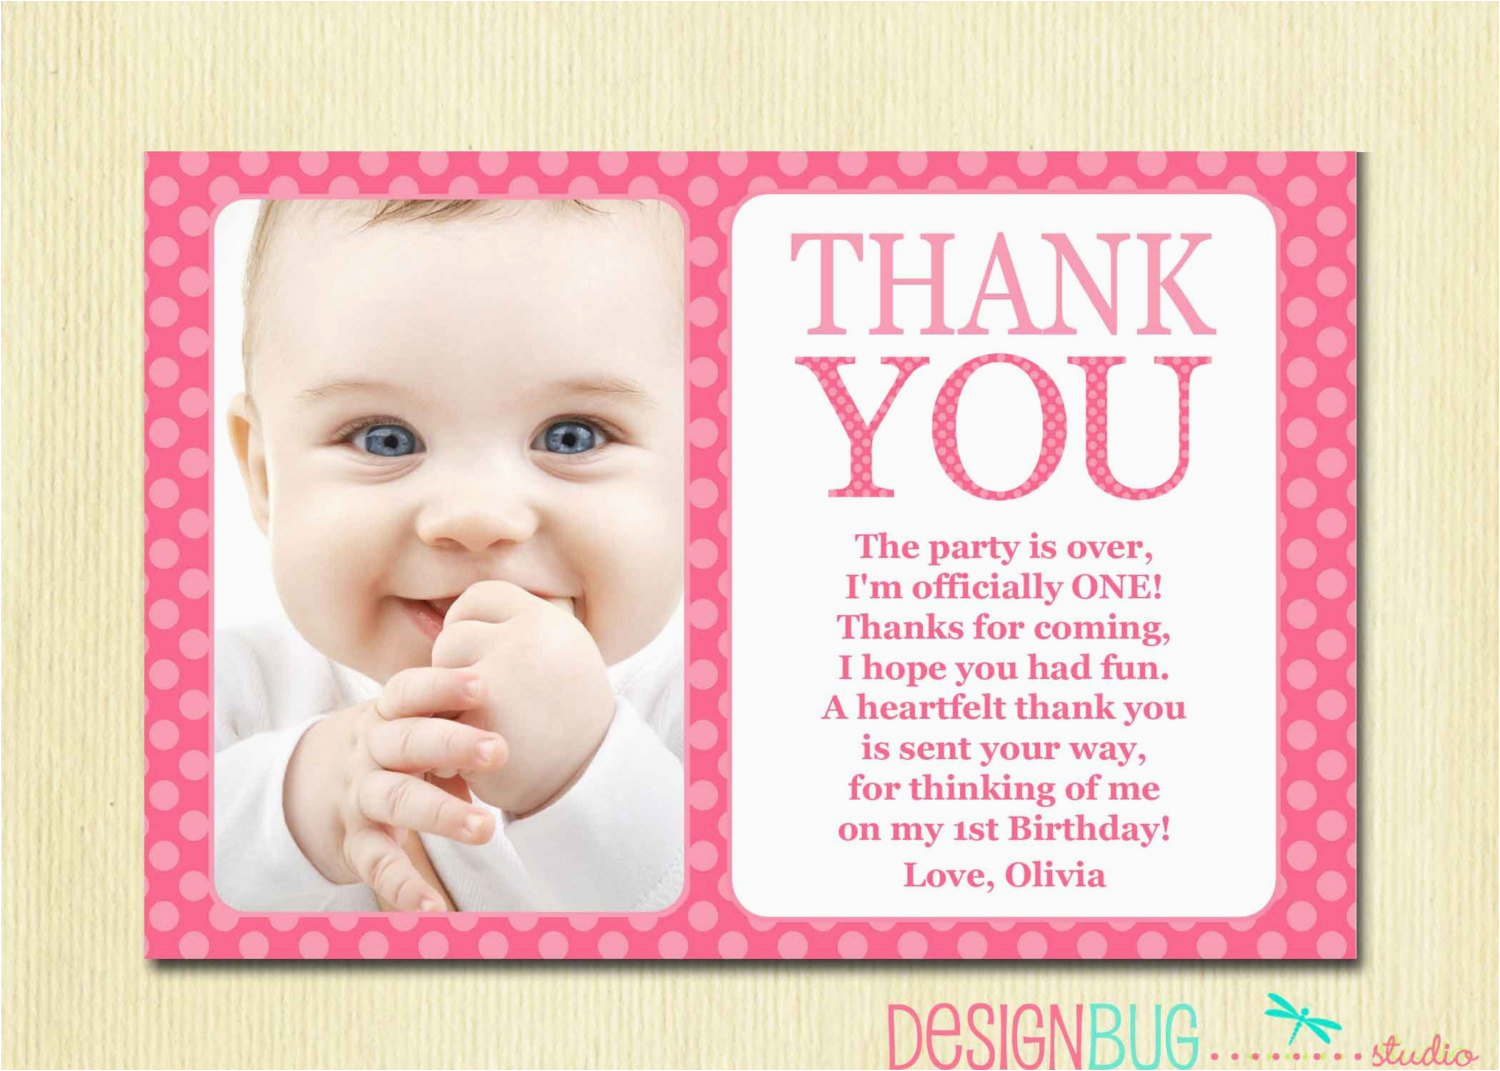 Thank You Cards for 1st Birthday First Birthday Matching Thank You Card 4×6 the Big One Diy